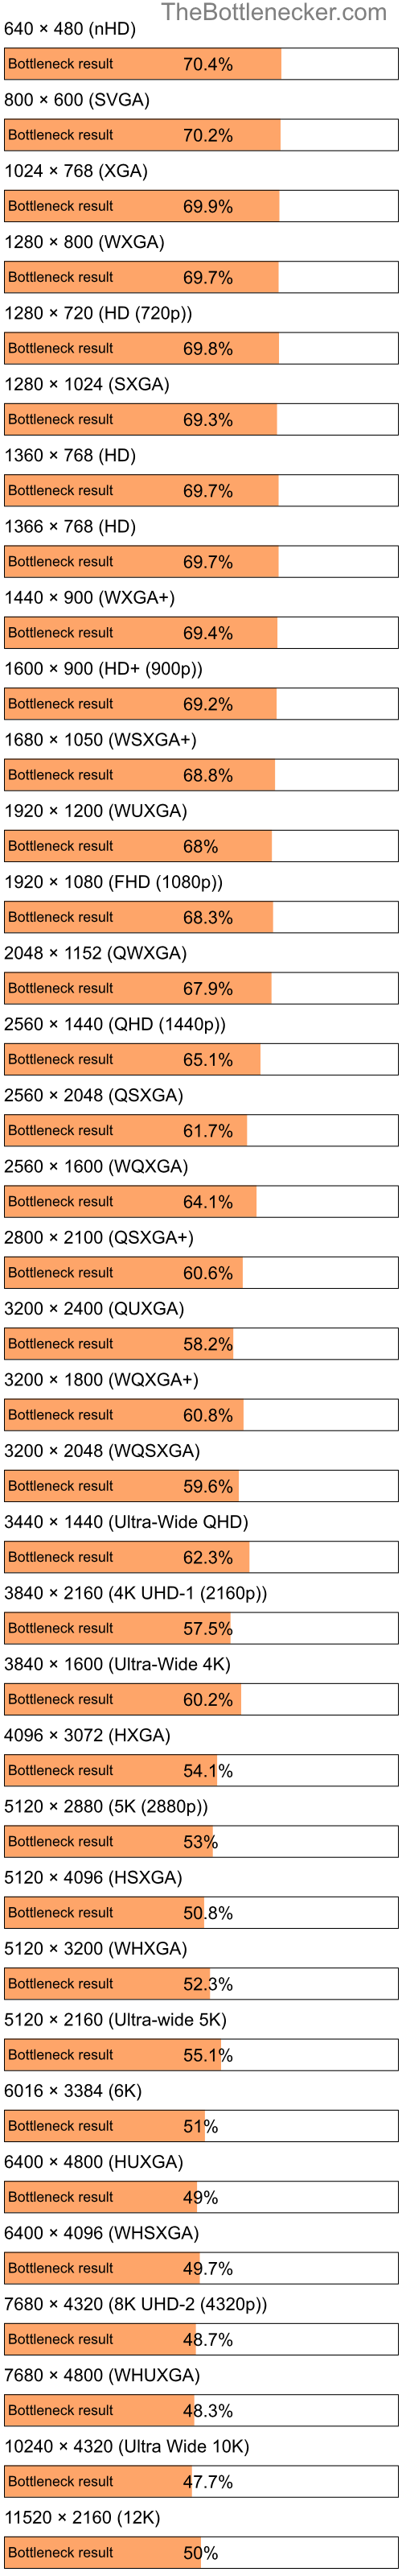 Bottleneck results by resolution for Intel Core2 Duo E7400 and NVIDIA GeForce RTX 3060 in Graphic Card Intense Tasks